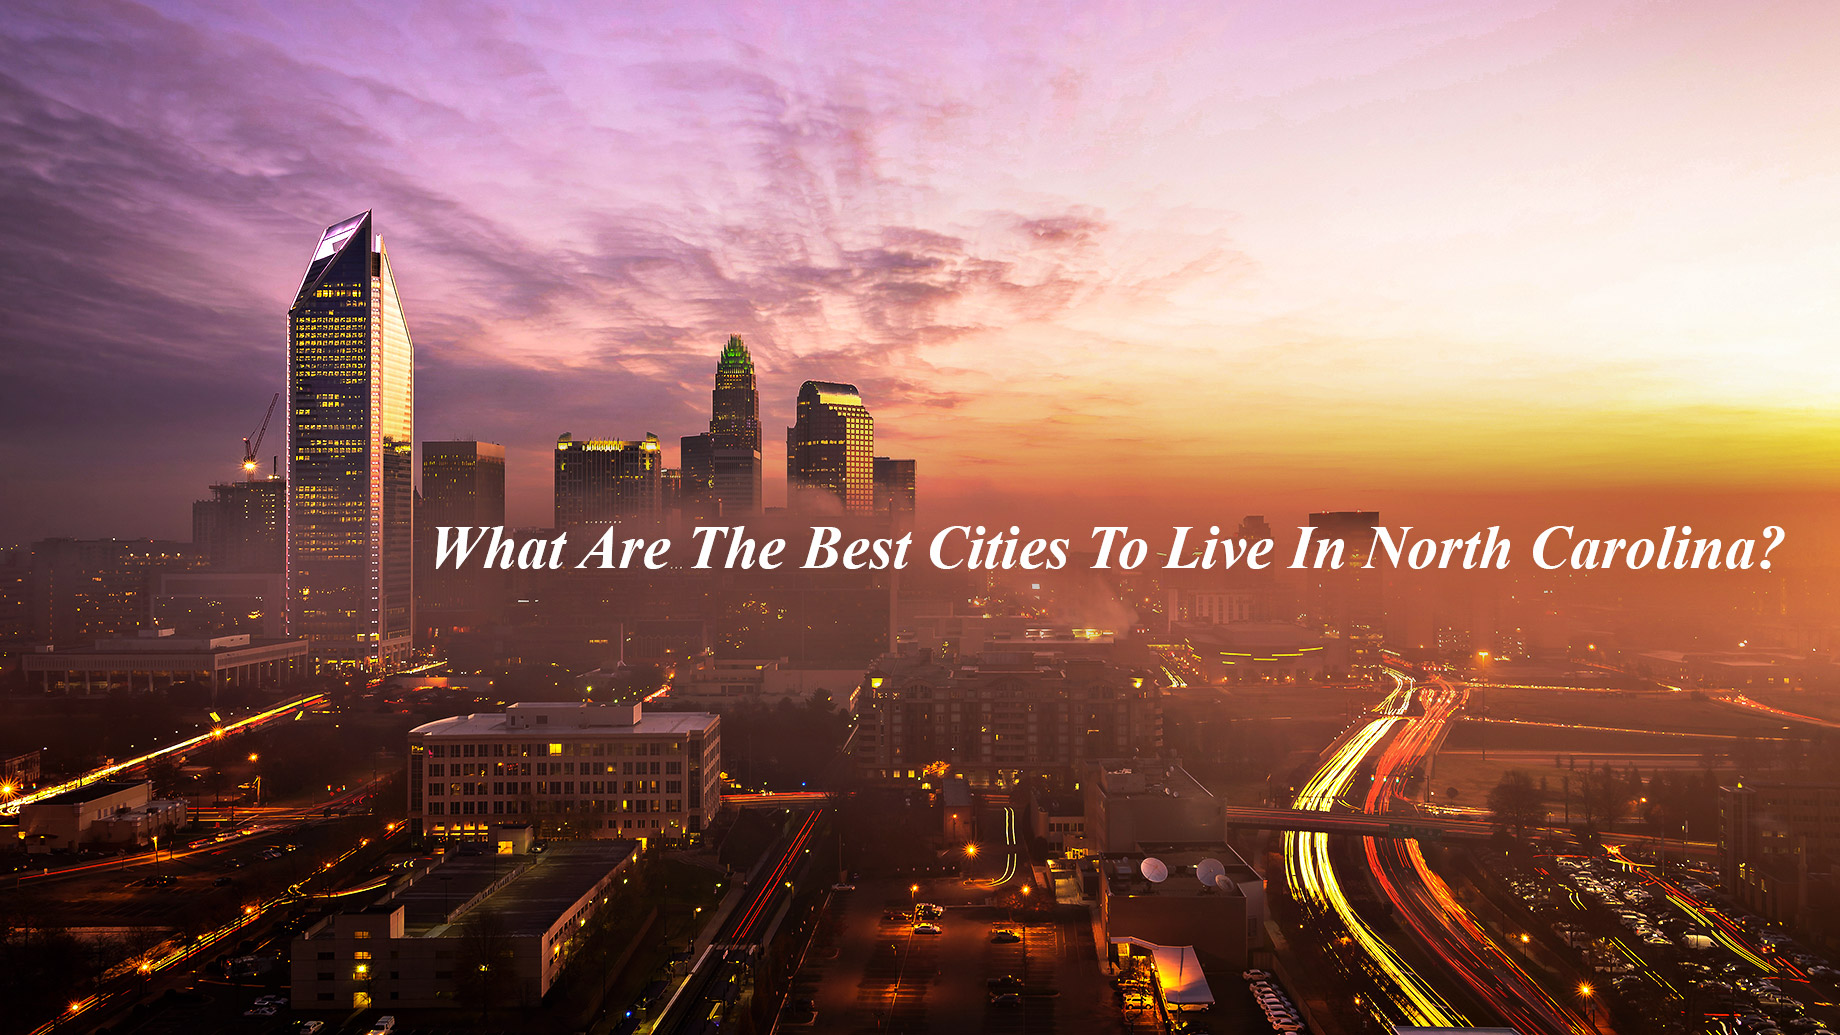 What Are The Best Cities To Live In North Carolina?